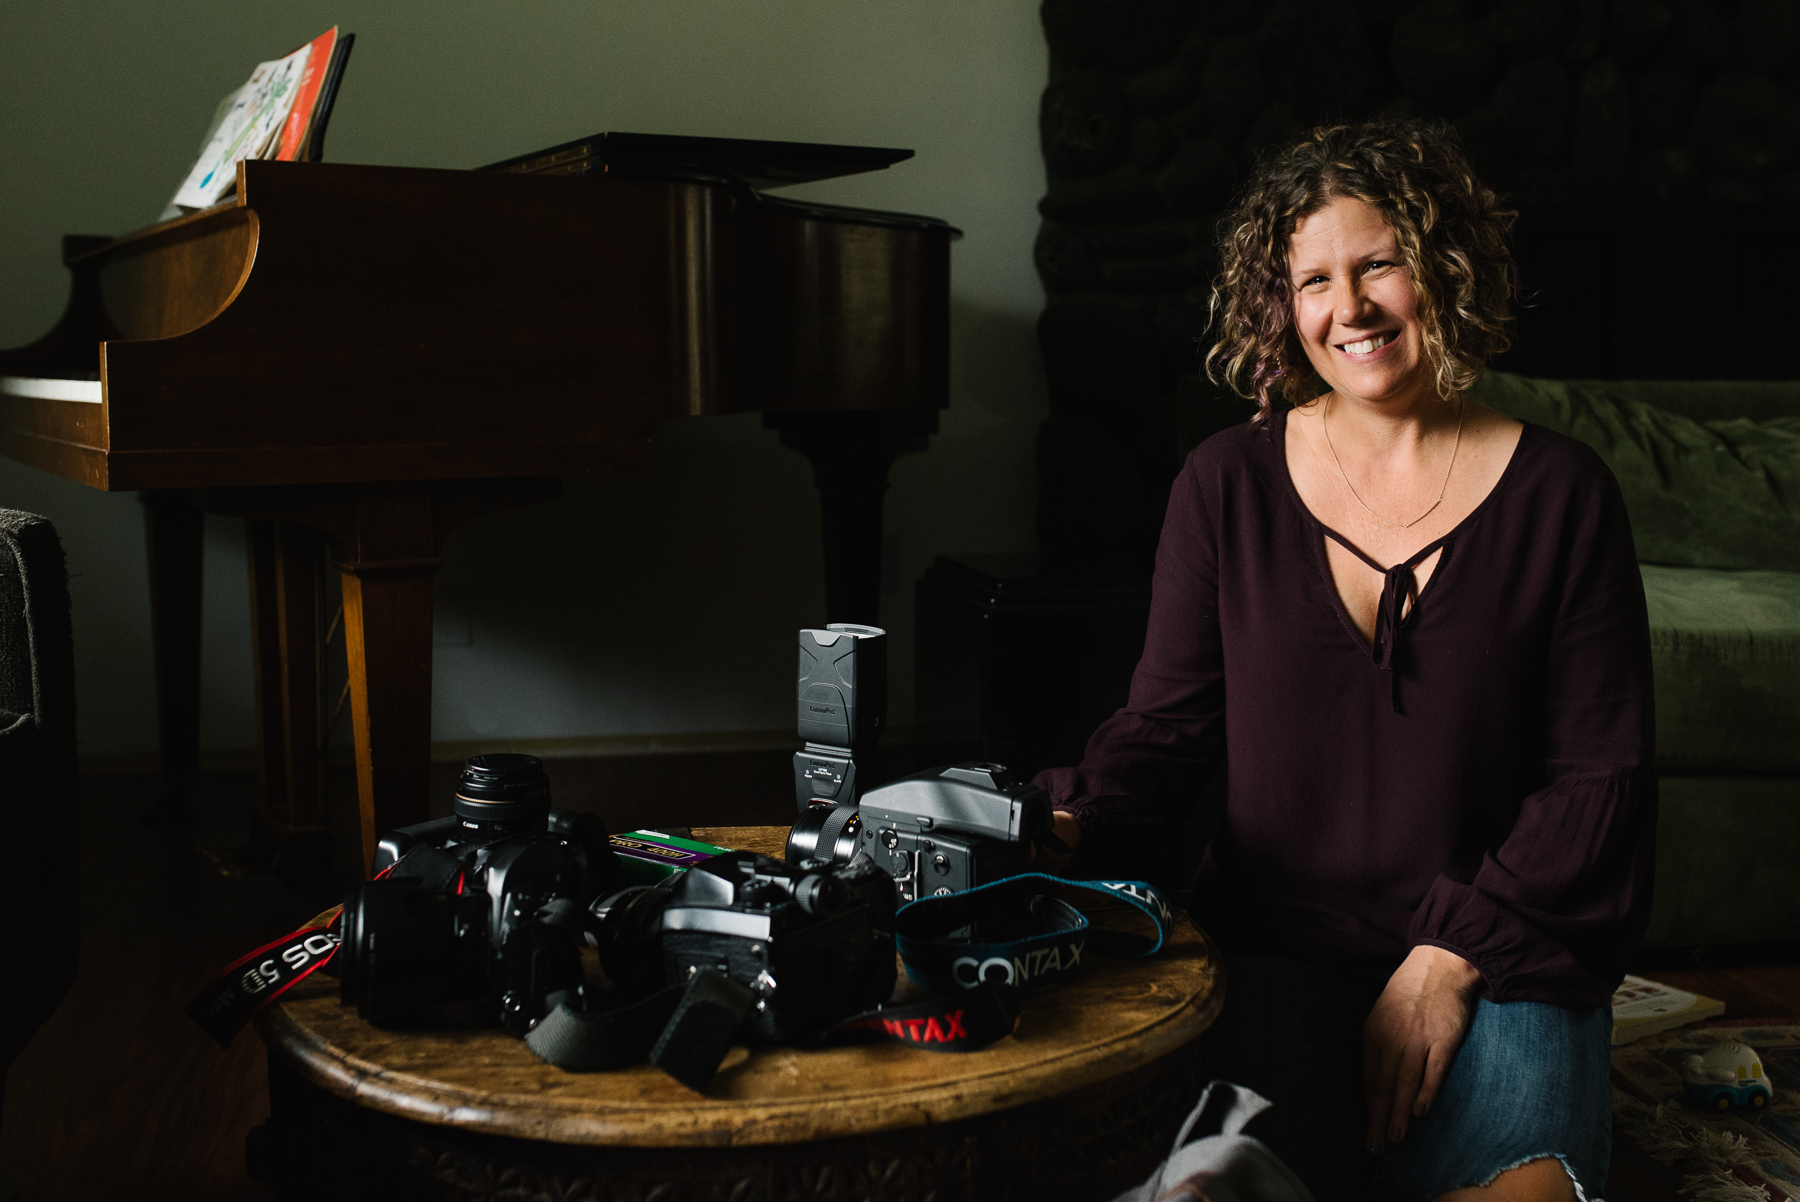 Female photographer sitting in living room with camera equipment on coffee table